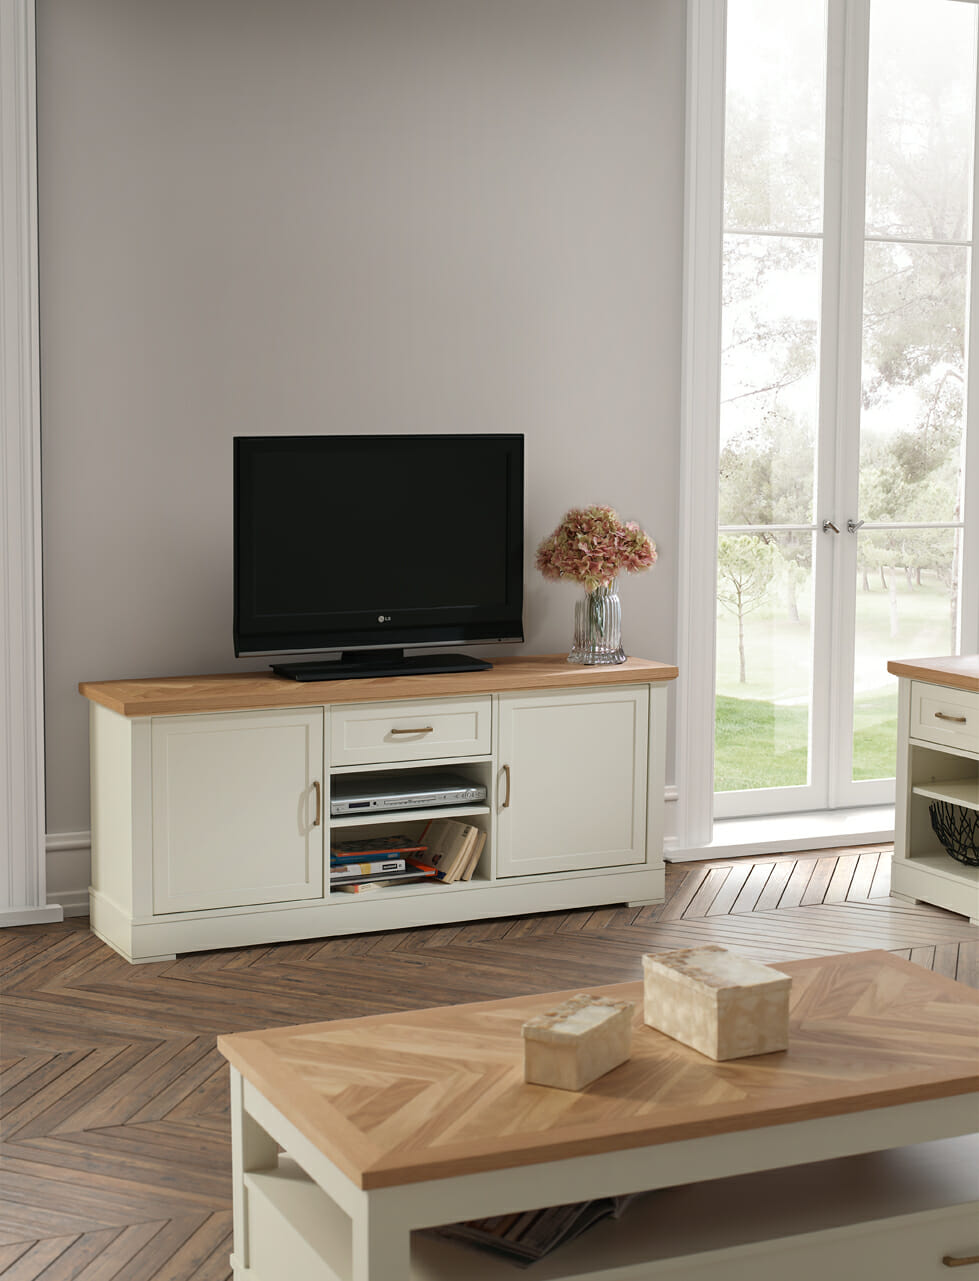 panamar-muebles-white-lacquered-living-room-furniture